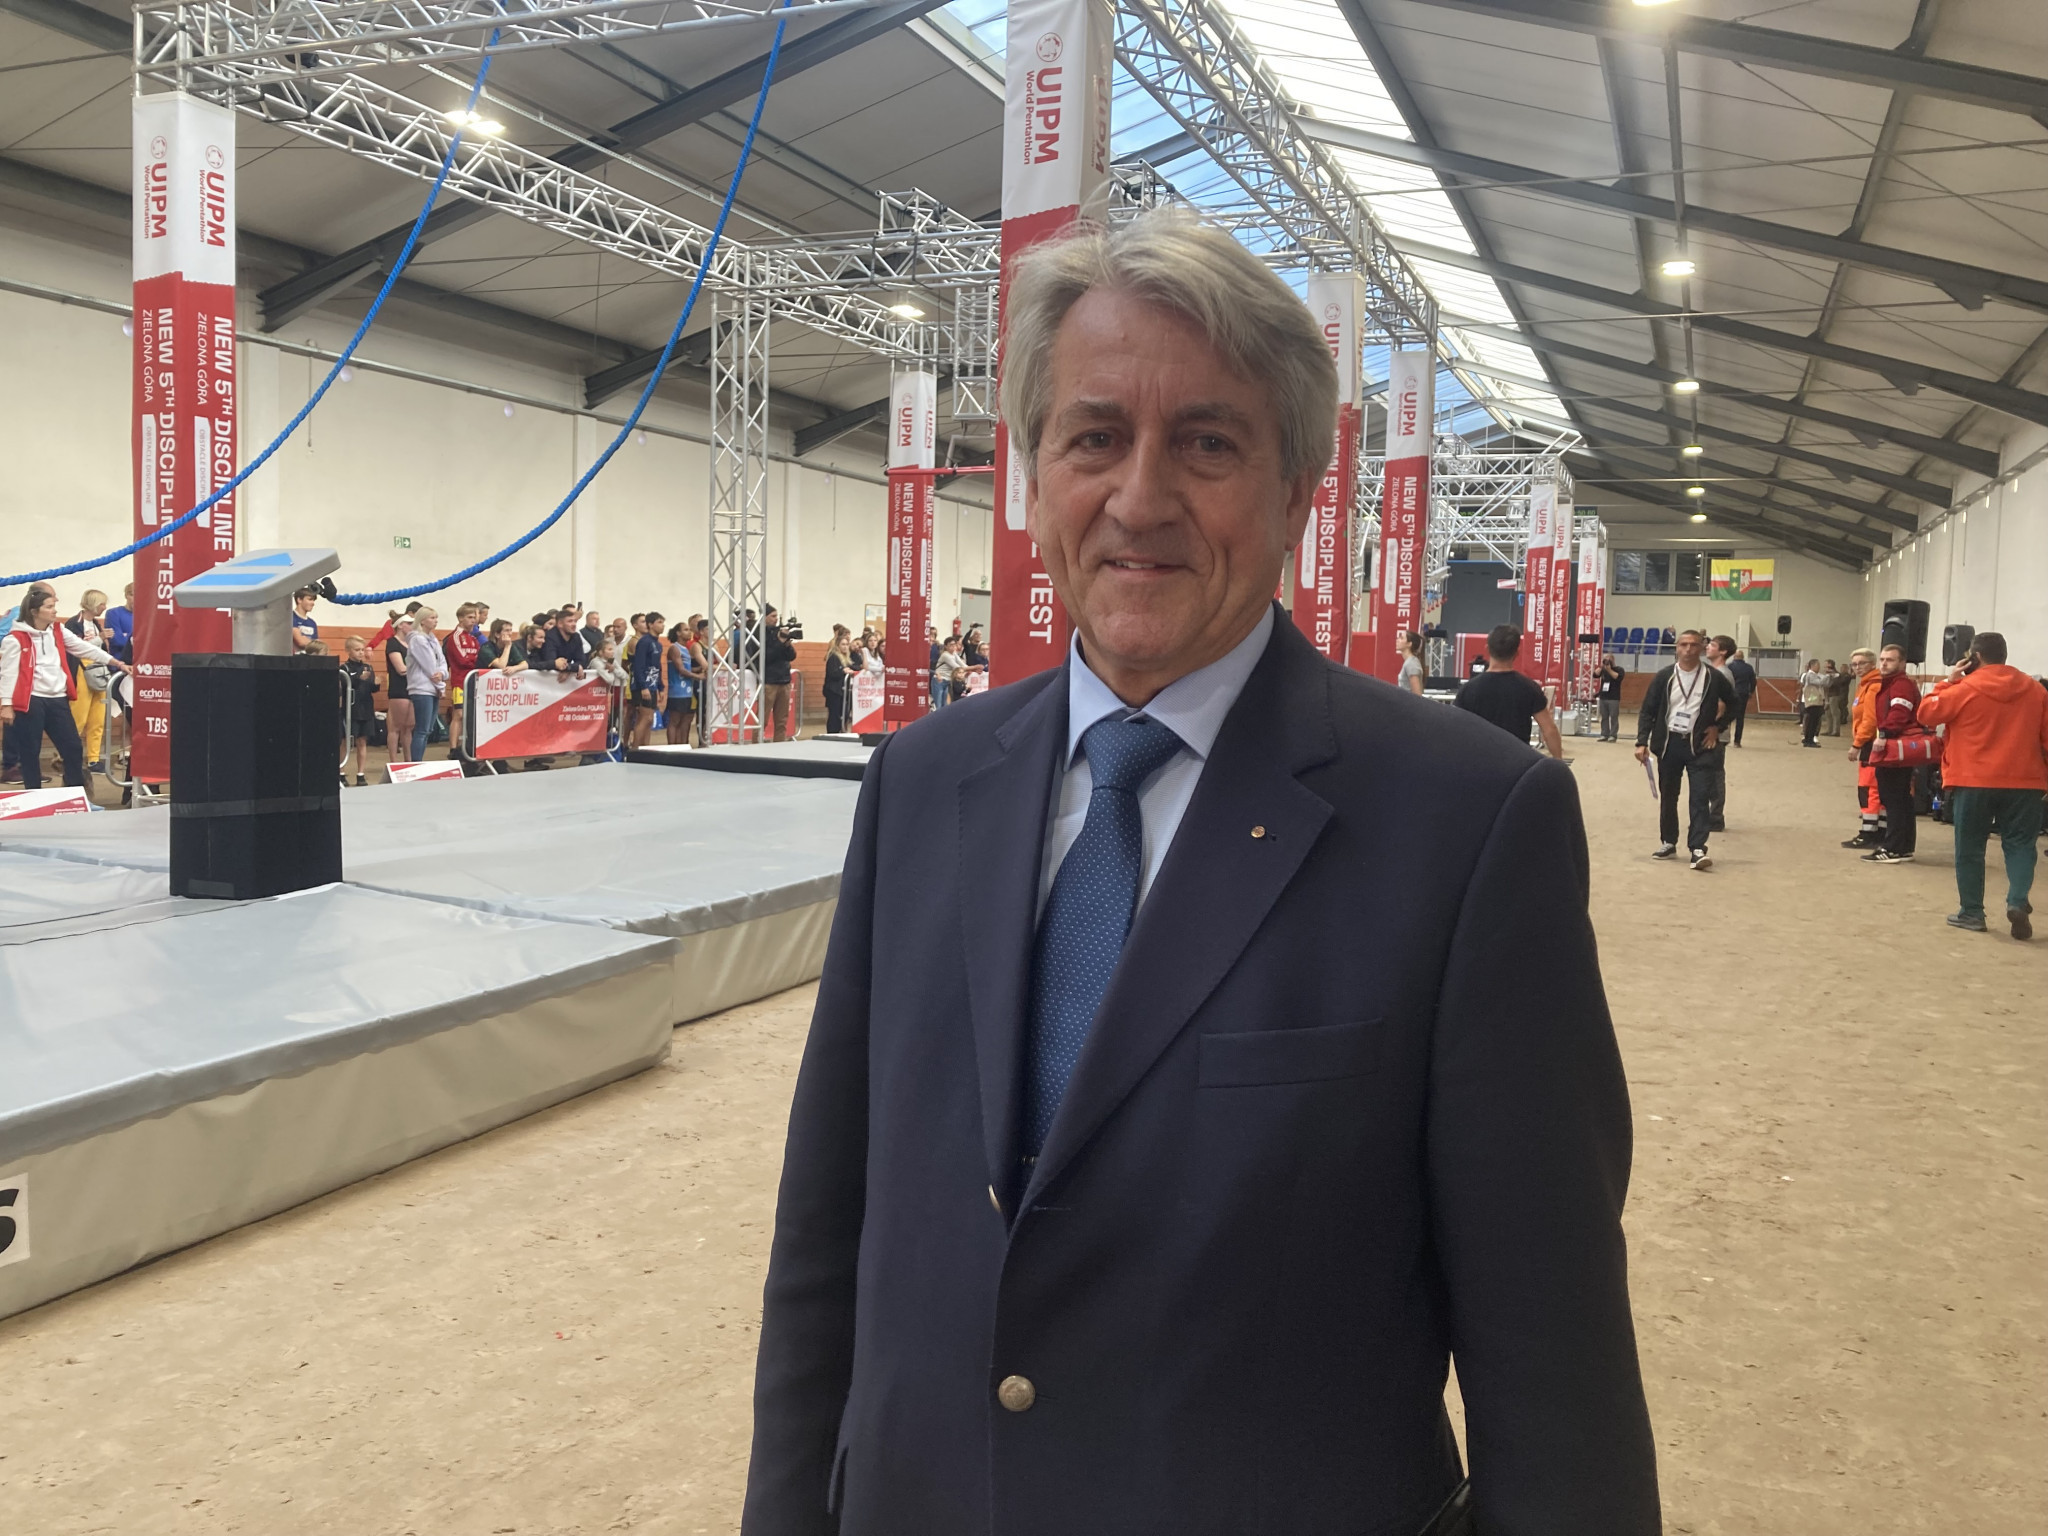 UIPM President Klaus Schormann has claimed the process to ditch horse riding has been "open" and "democratic" ©ITG